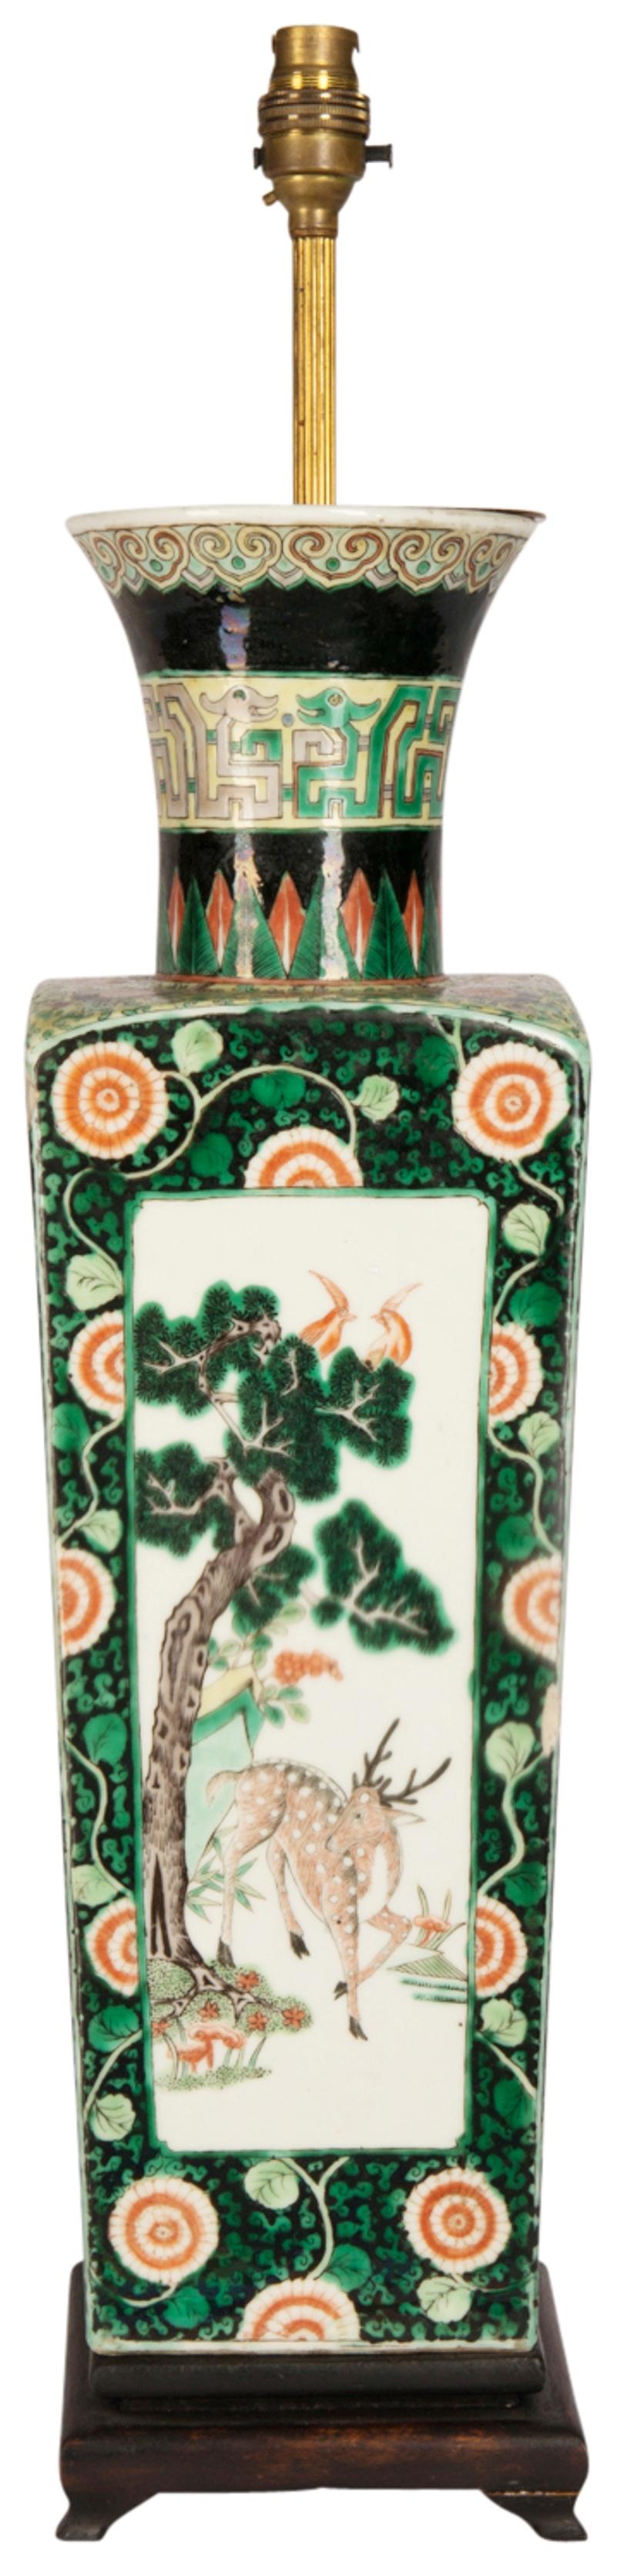 A good quality 19th century Chinese Famille Verte porcelain vase or lamp. Having the classical Green and Black ground, with scrolling foliate decoration, inset painted panels with exotic birds and flowers. Converted to a lamp.